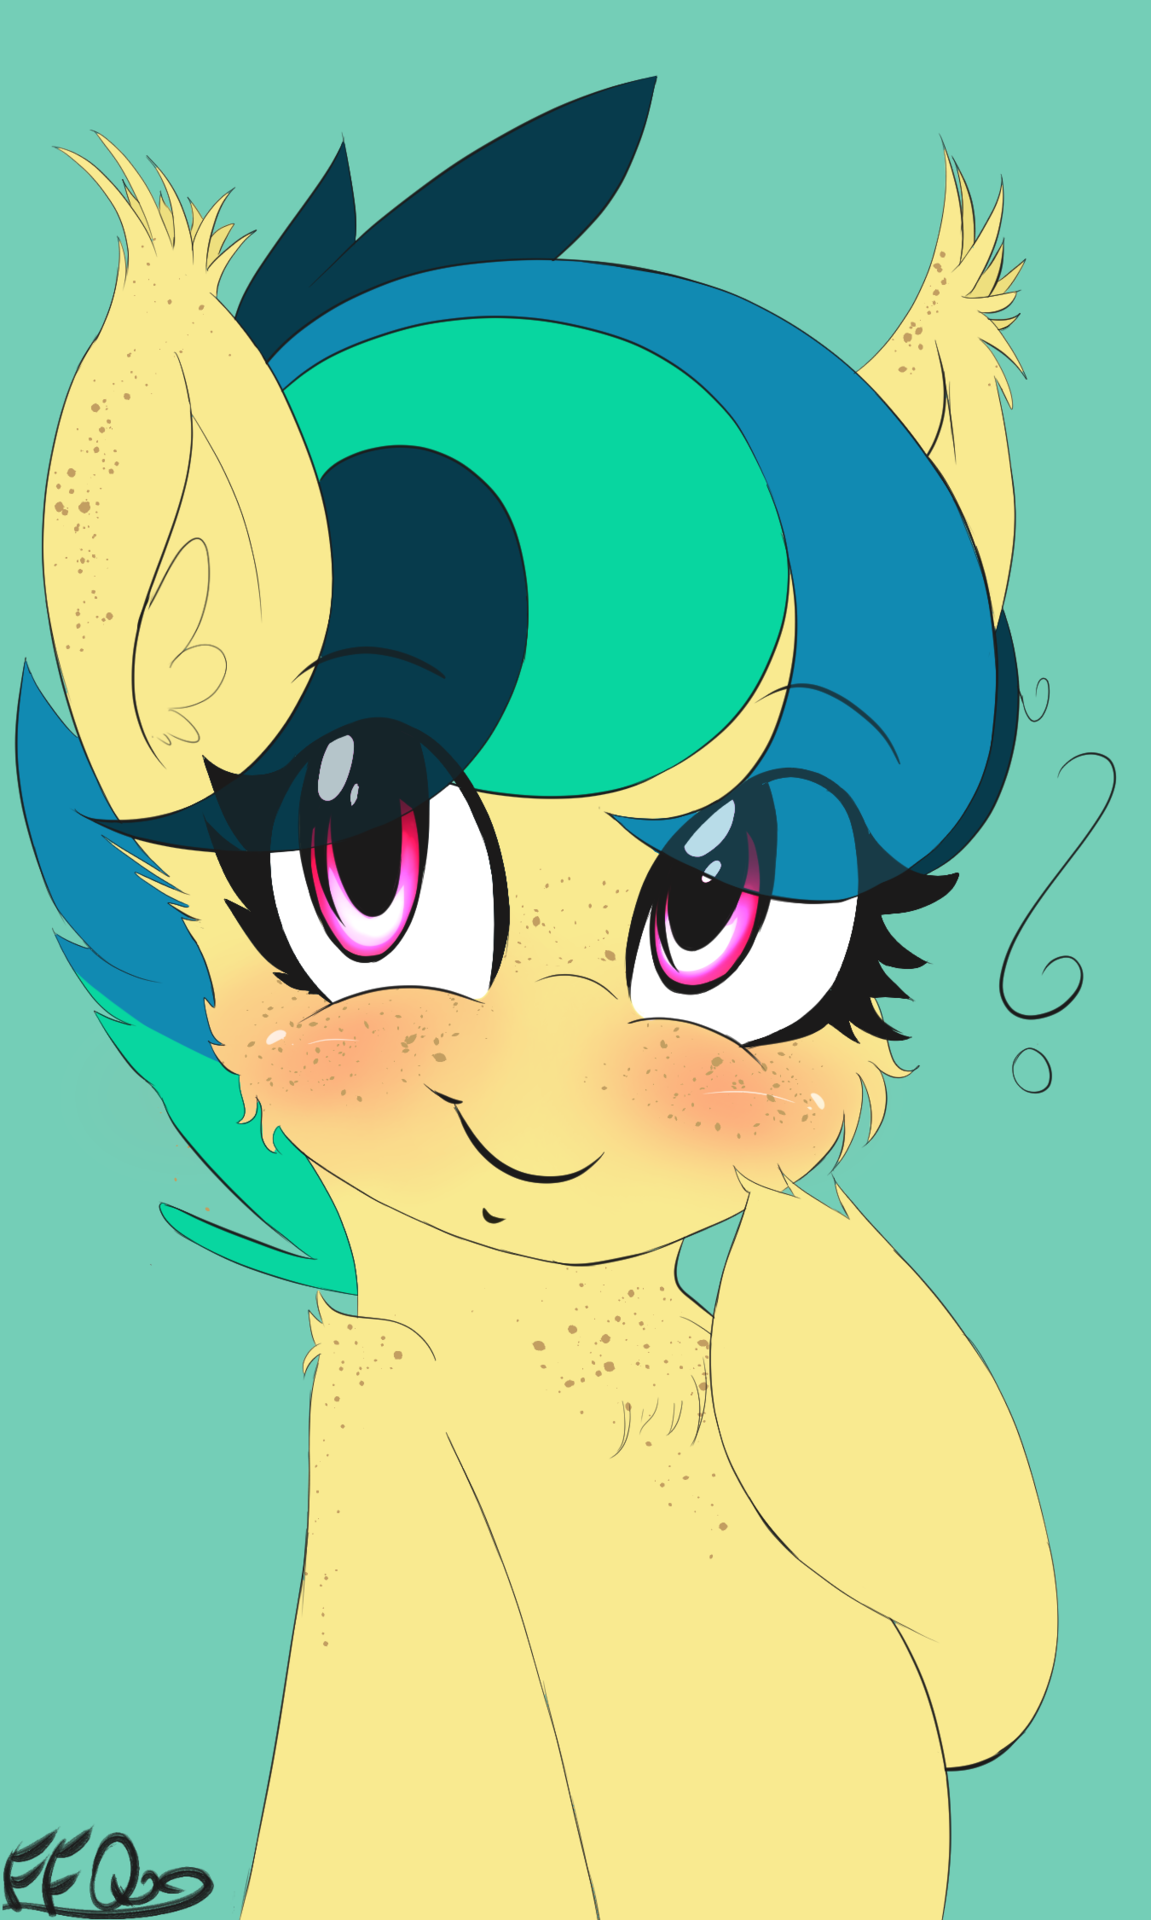 shinyprivatecorner: Shino have a hella cute filly ohse.  =w= posting here cuz why